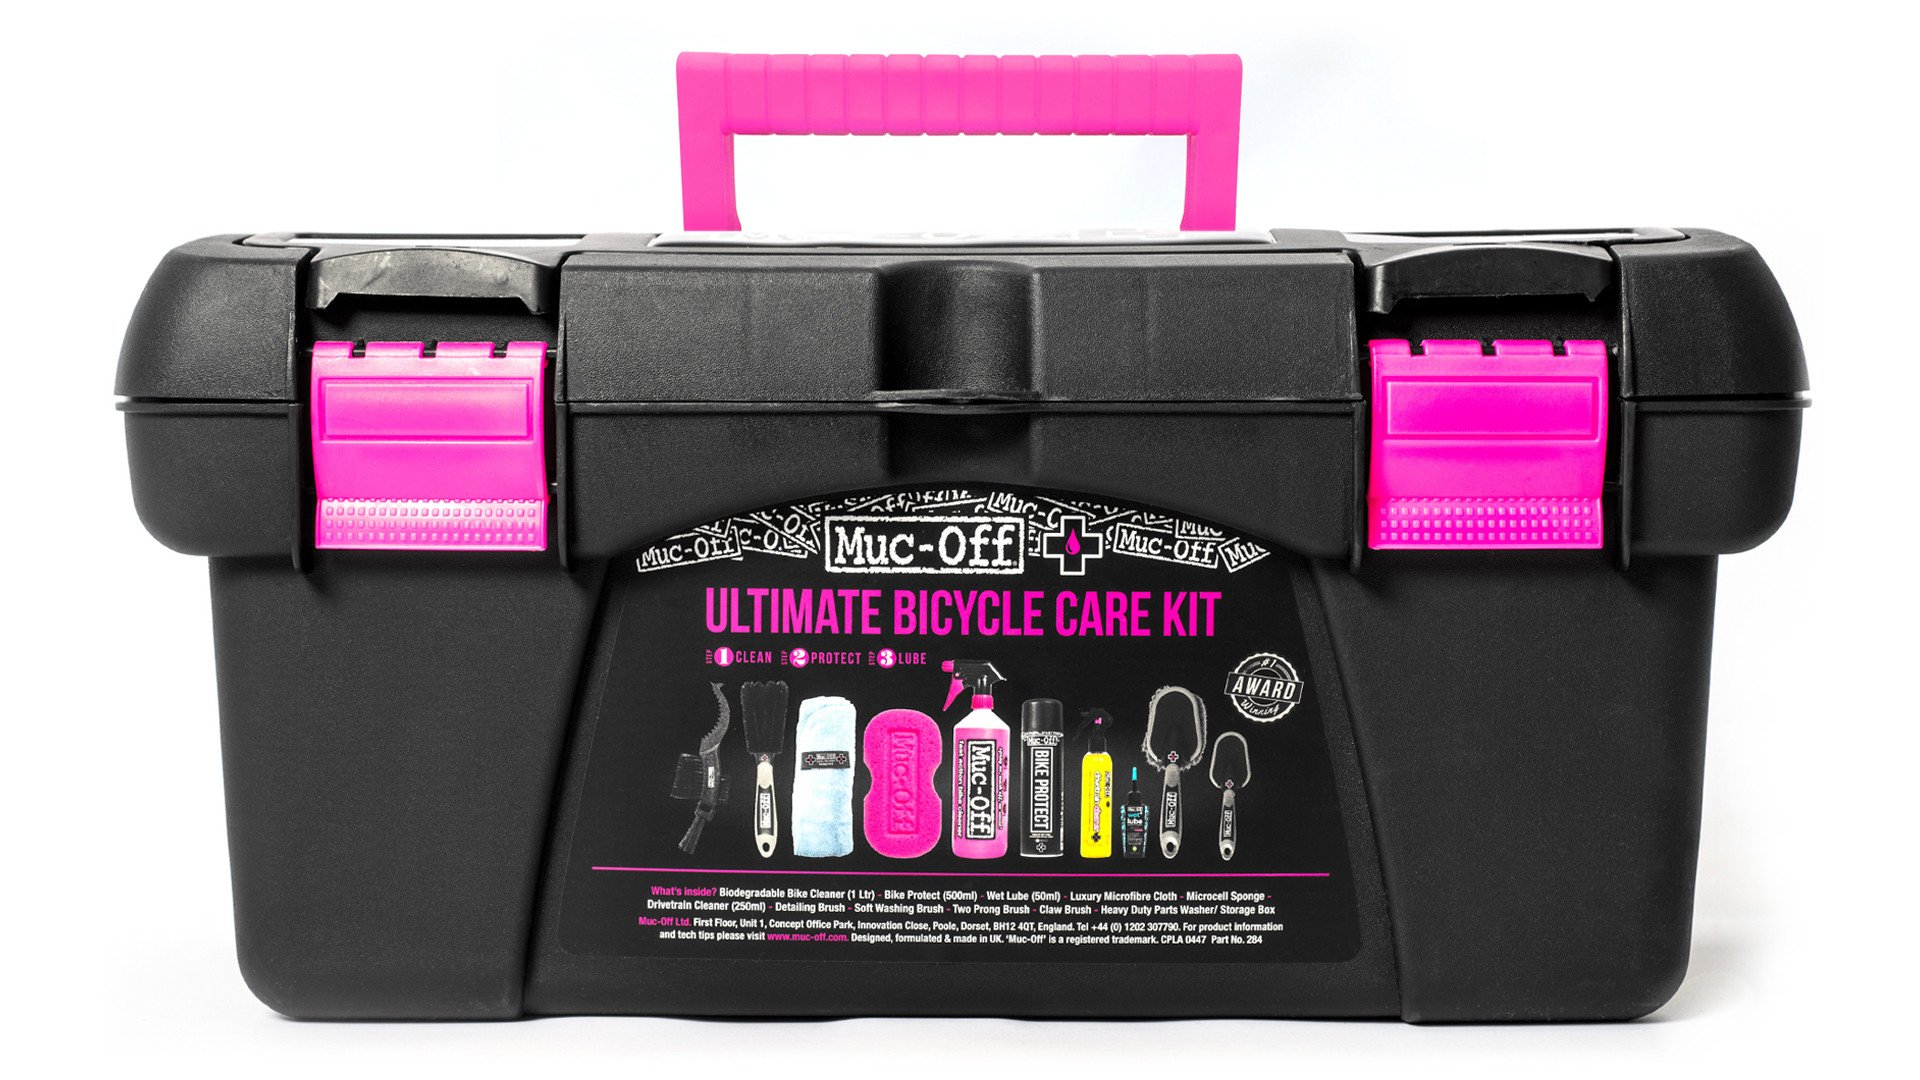 Muc-Off Cykelvårdskit, Ultimate Bicycle Care Kit